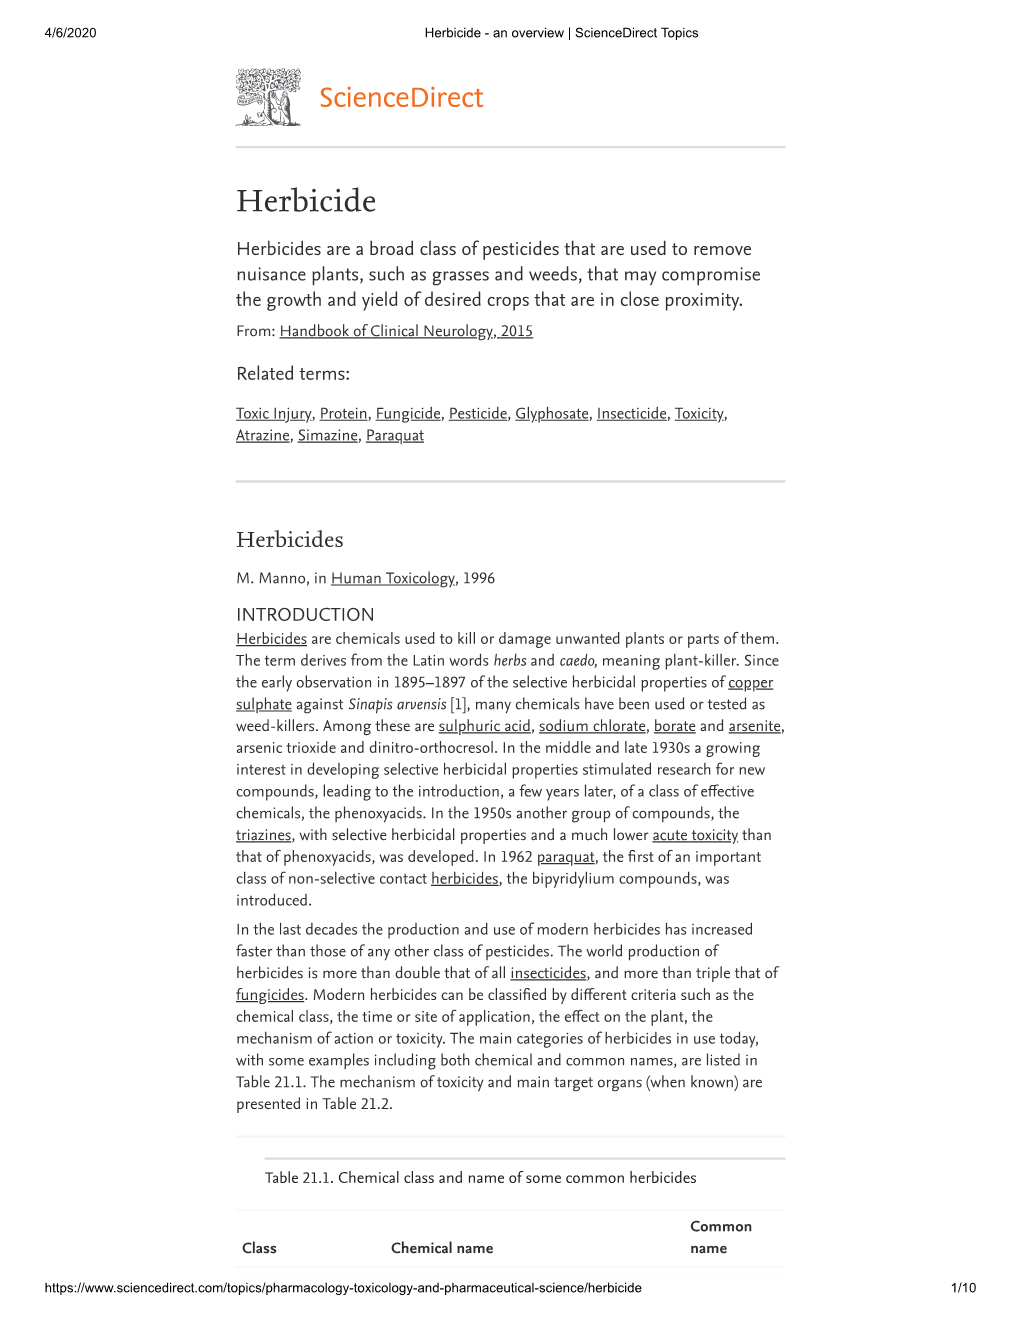 List of Industrial Herbicides Research